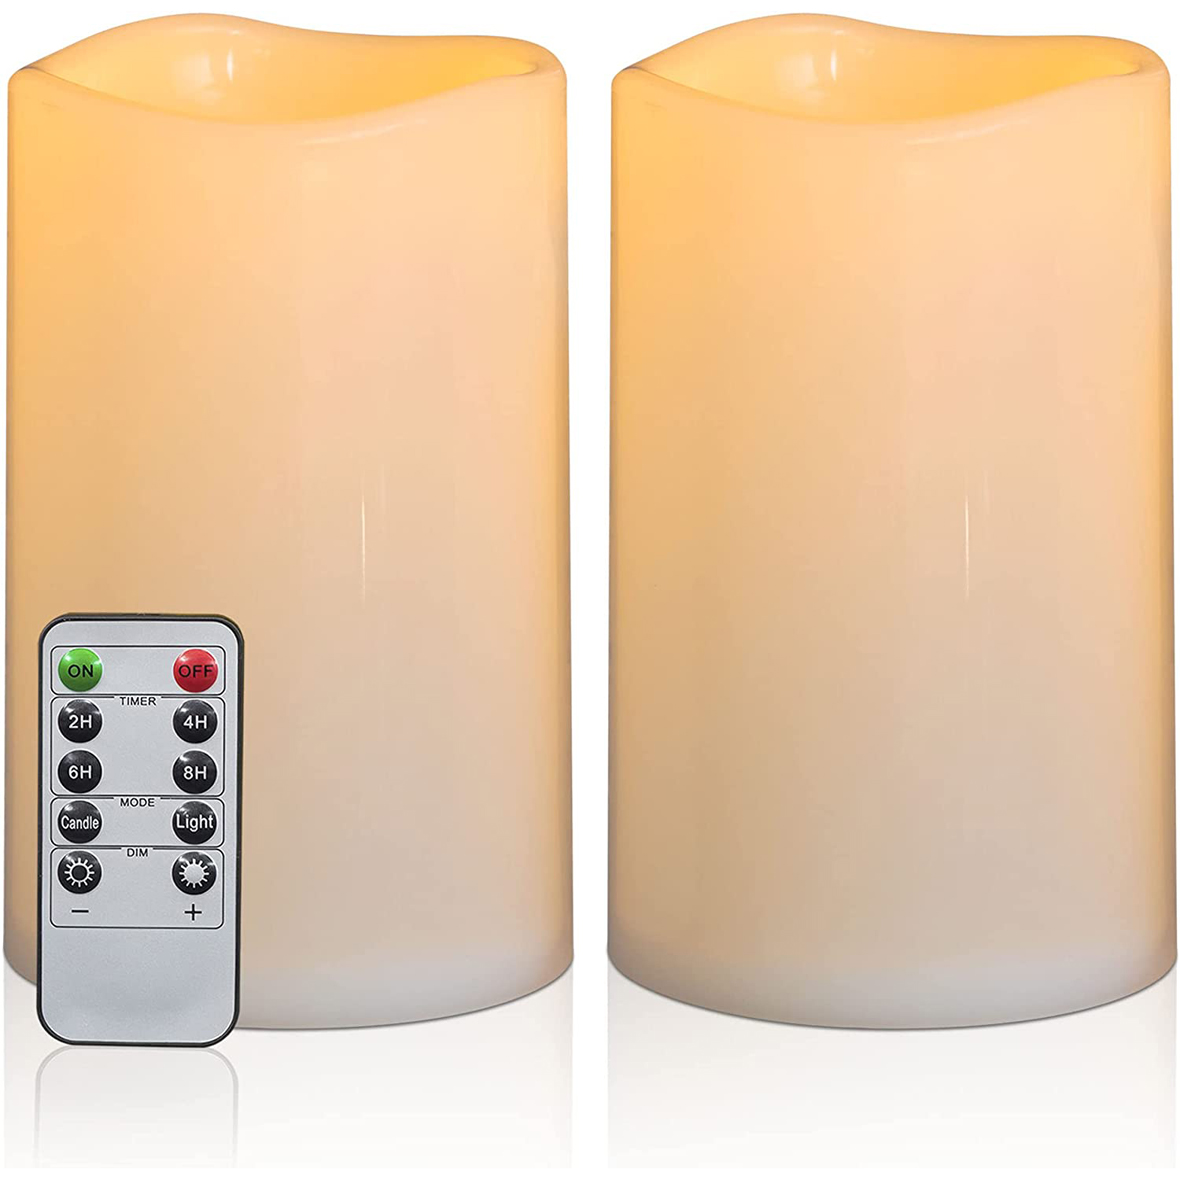 Yongmao 8" x 5" Waterproof Outdoor Flameless Candles Battery Operated LED Flickering Pillar Candles with Remote and Timer for Indoor Outdoor Lanterns, Long Lasting, Ivory Large, Set of 2